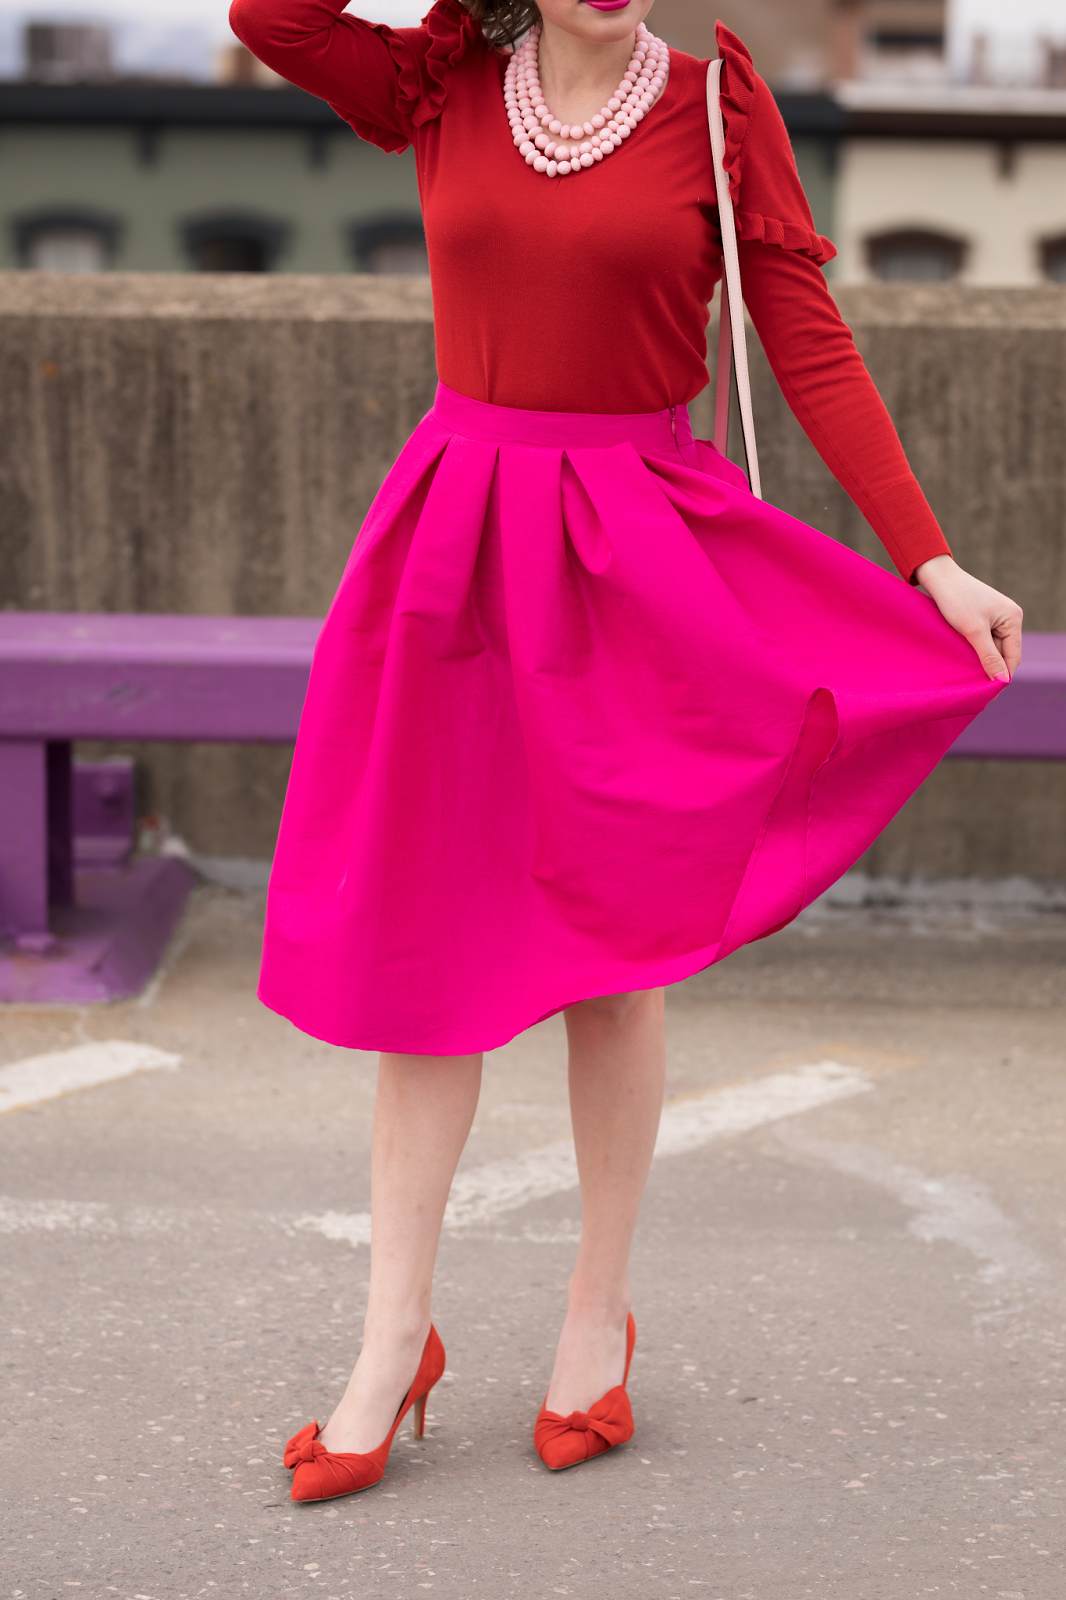 Styling a hot pink skirt